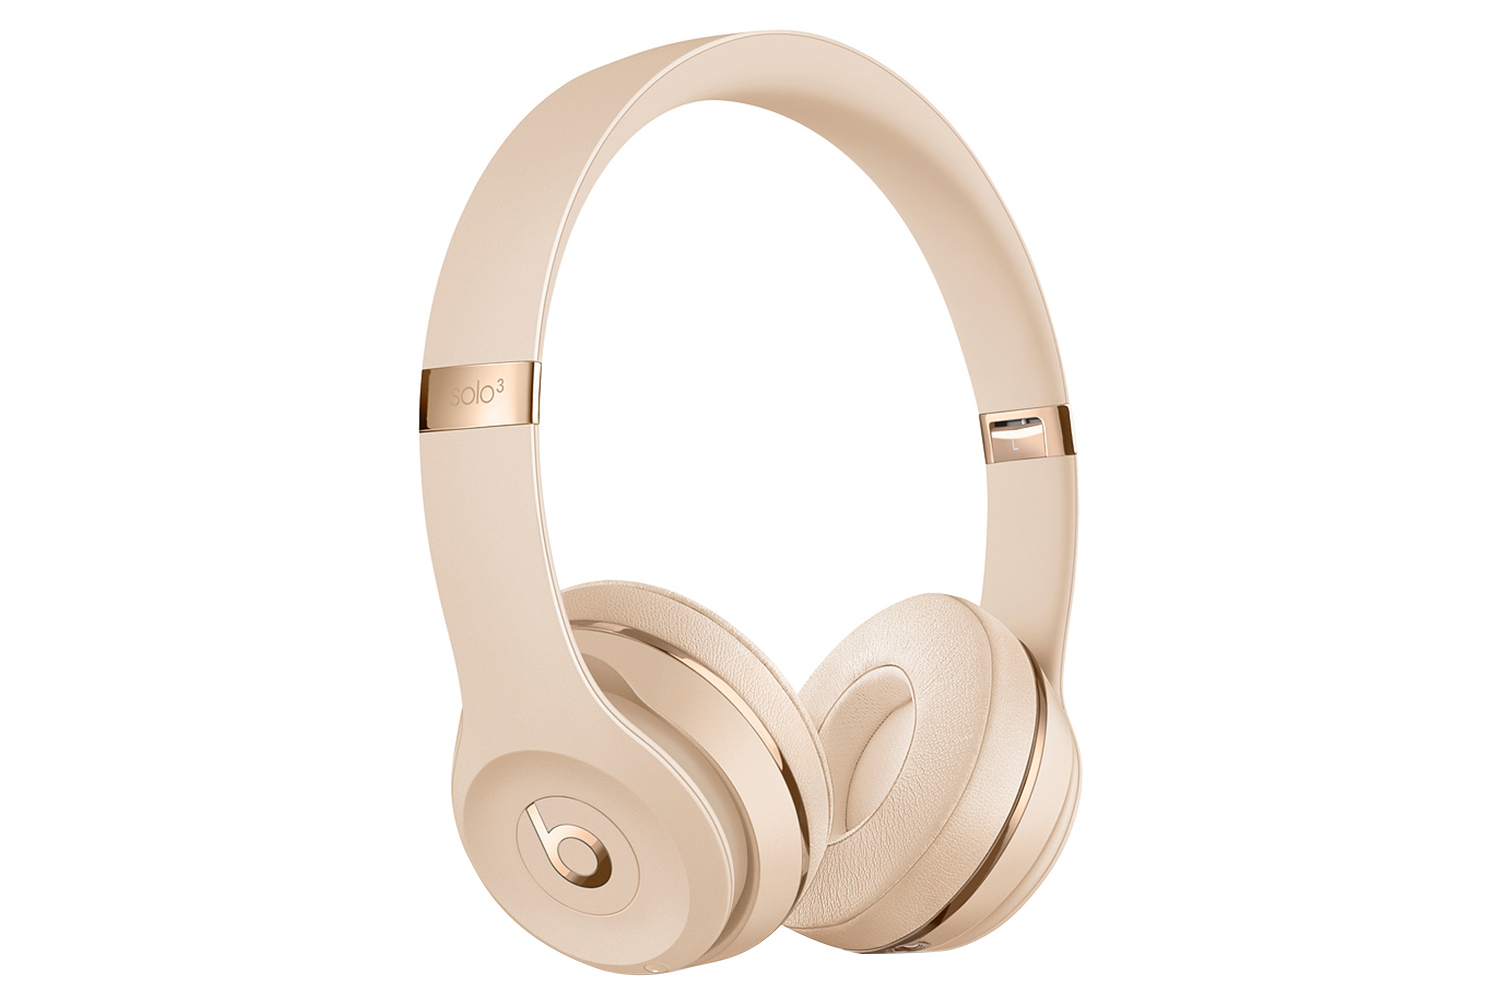 gold and white beats